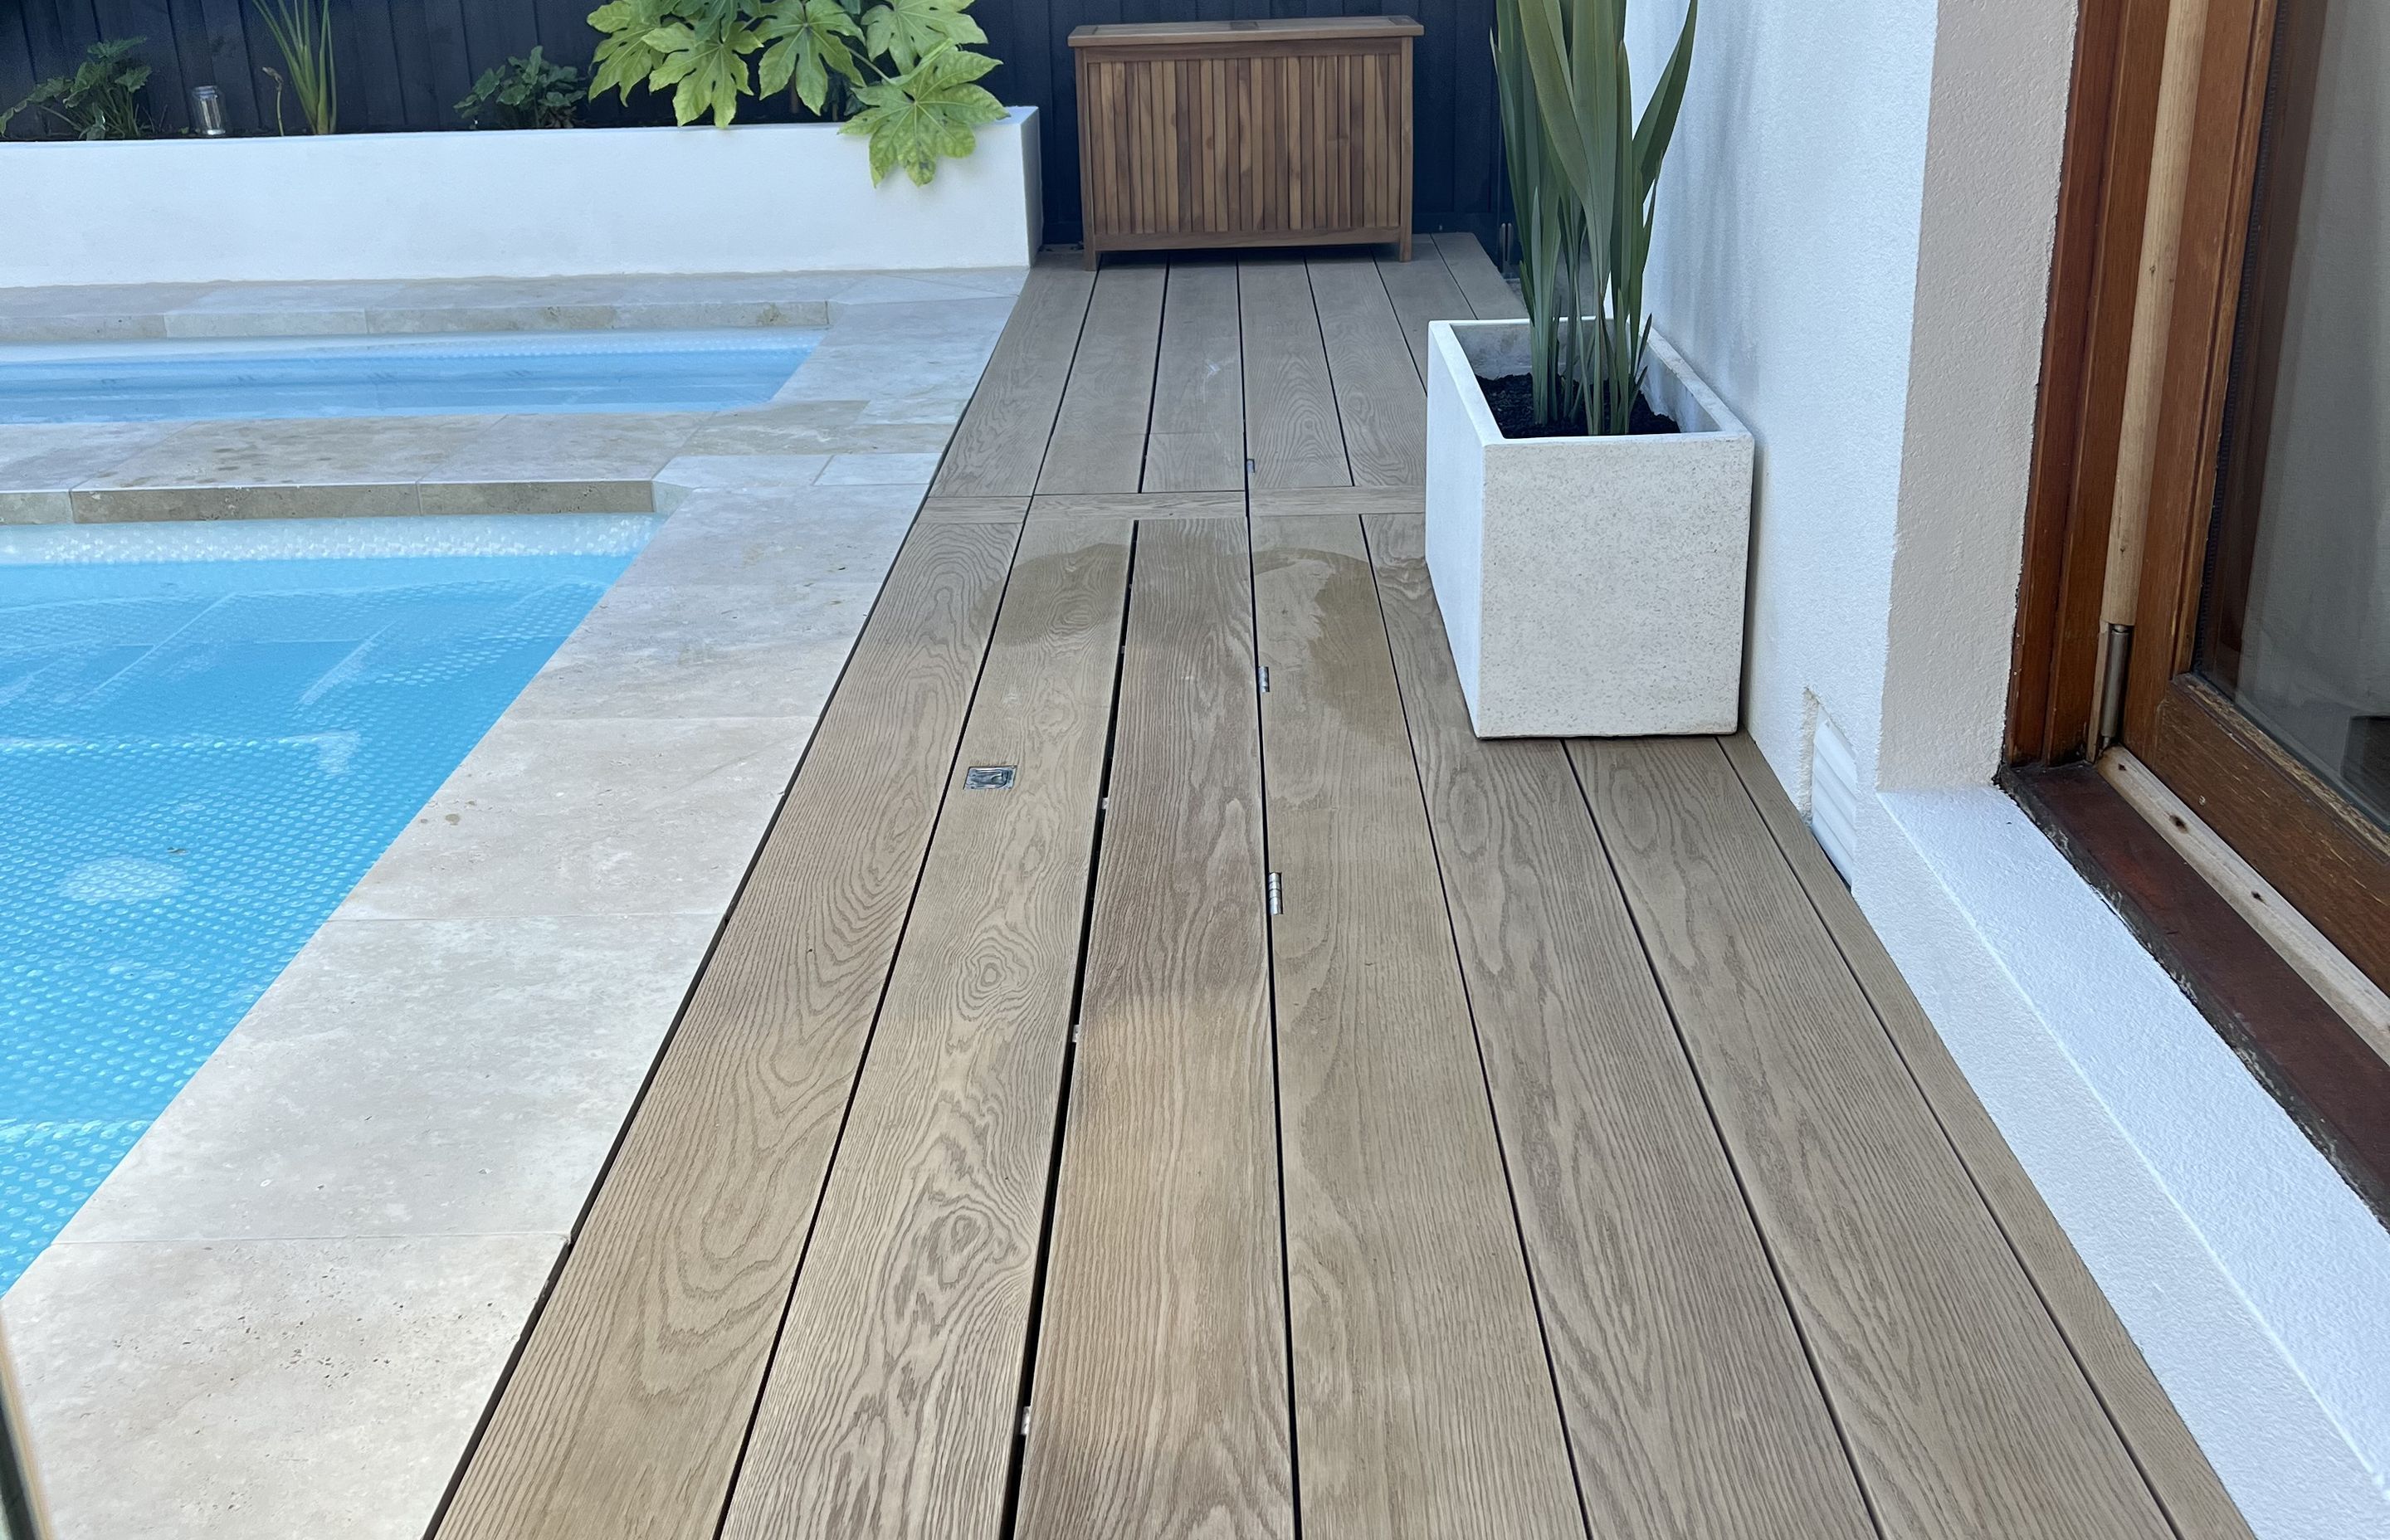 This timber decking pool cover is so seamless, it's practically invisible.